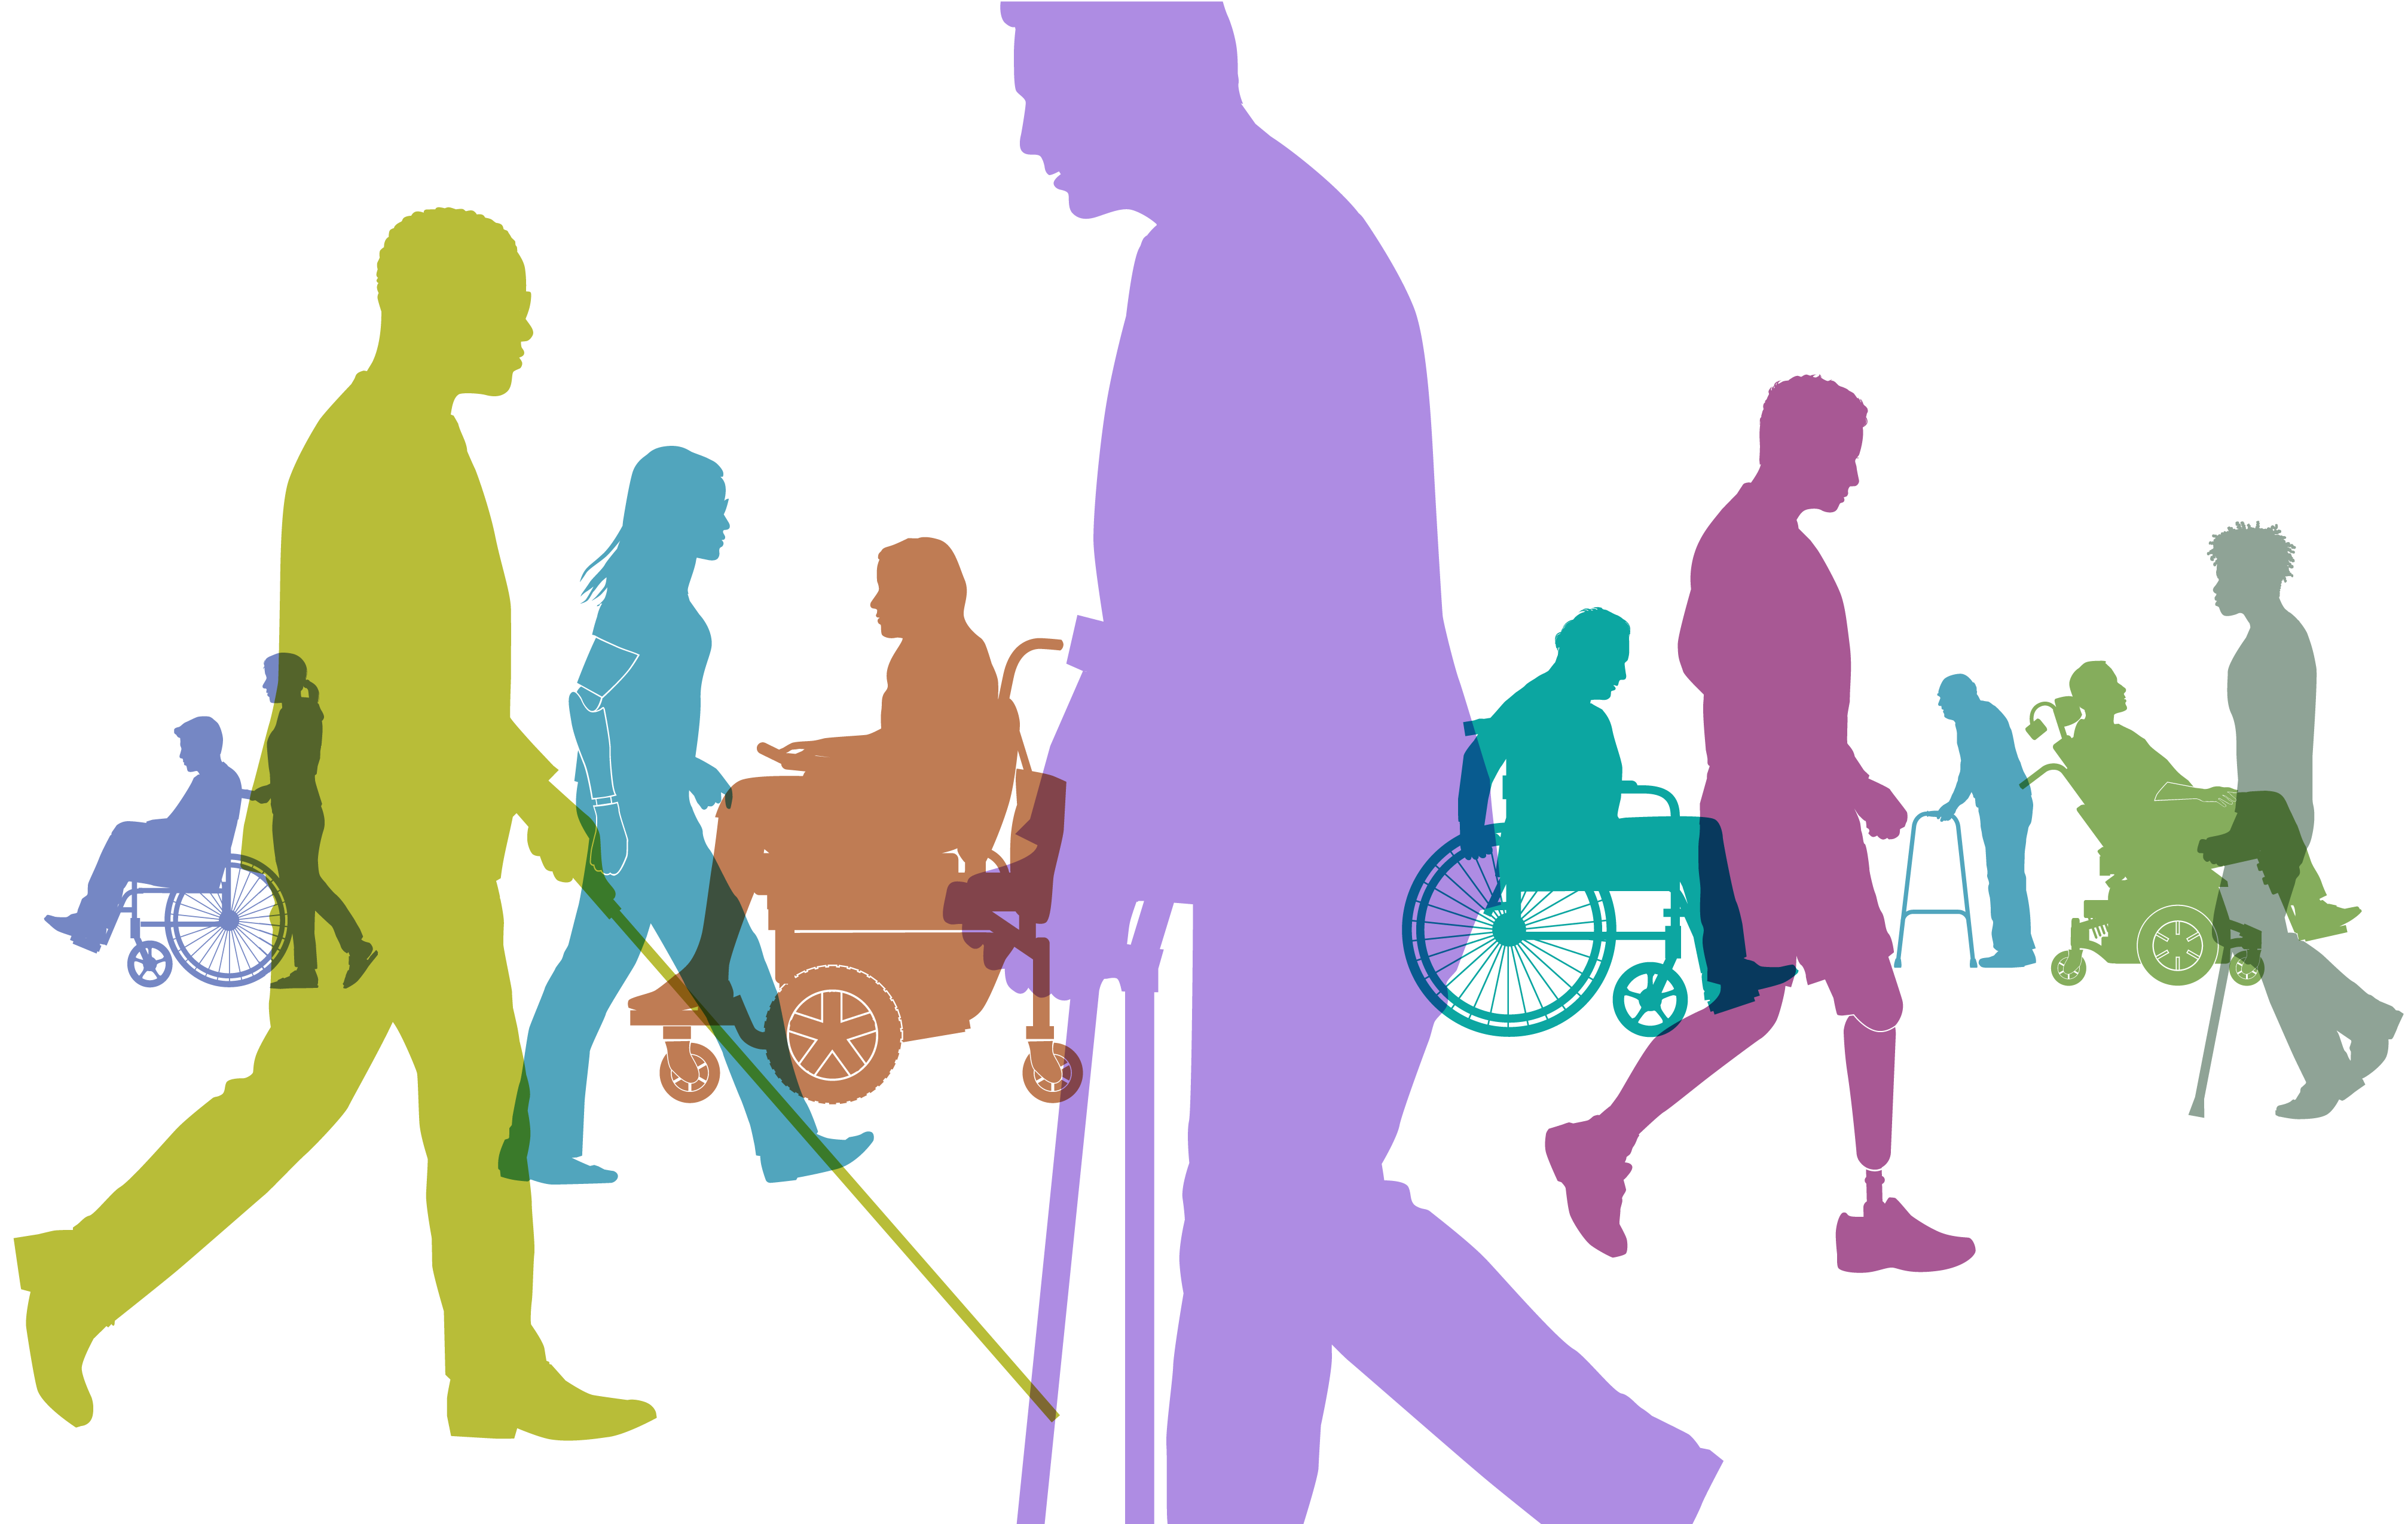 Image of people with variety of disabilities